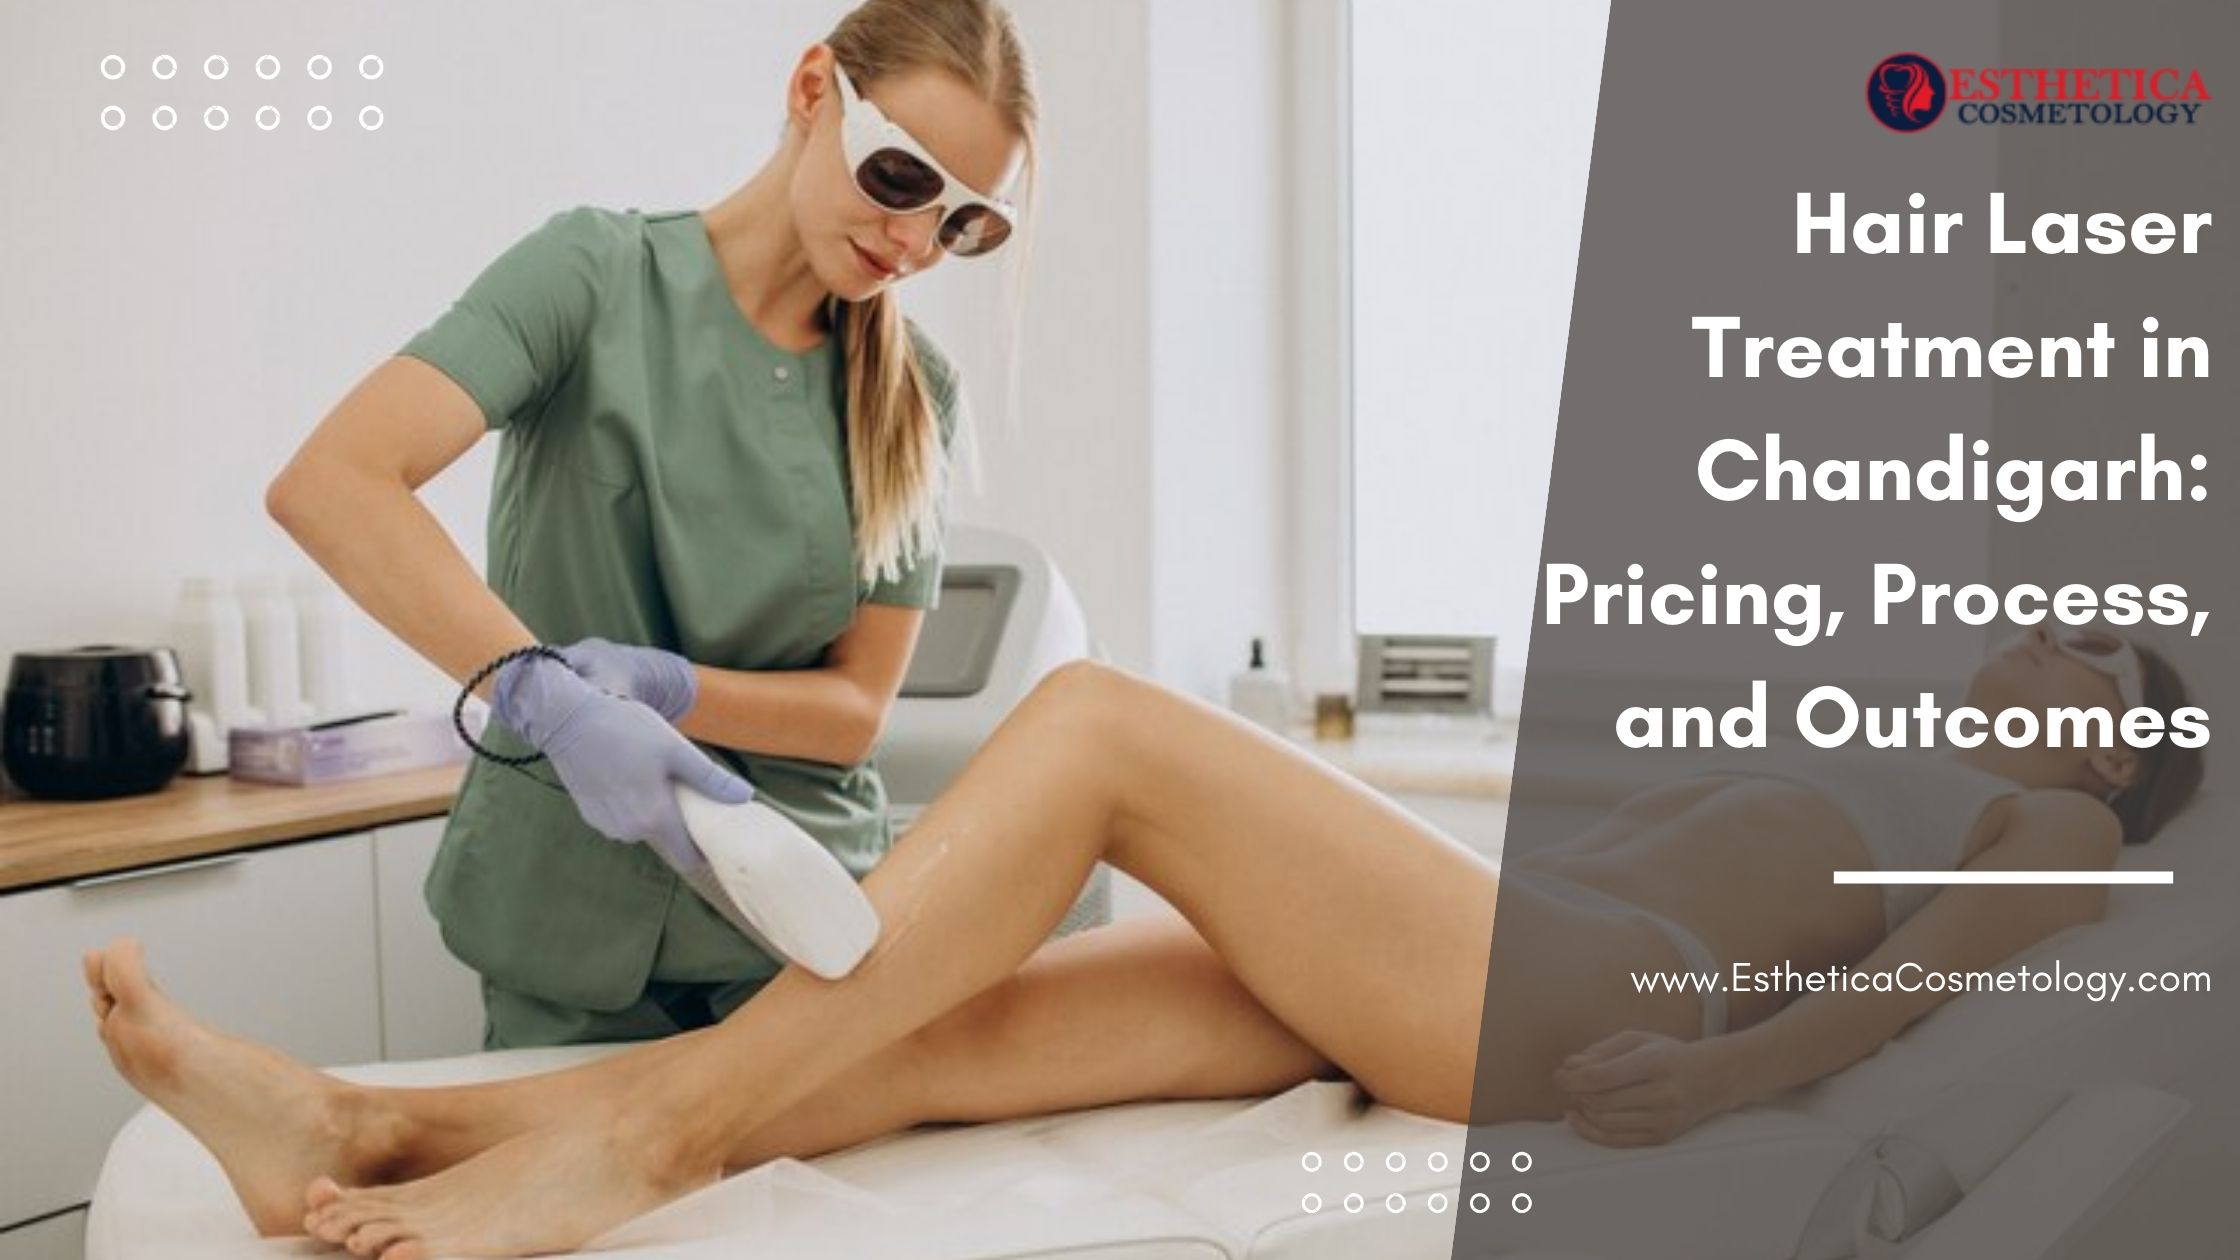 Hair Laser Treatment in Chandigarh: Pricing, Process, and Outcomes